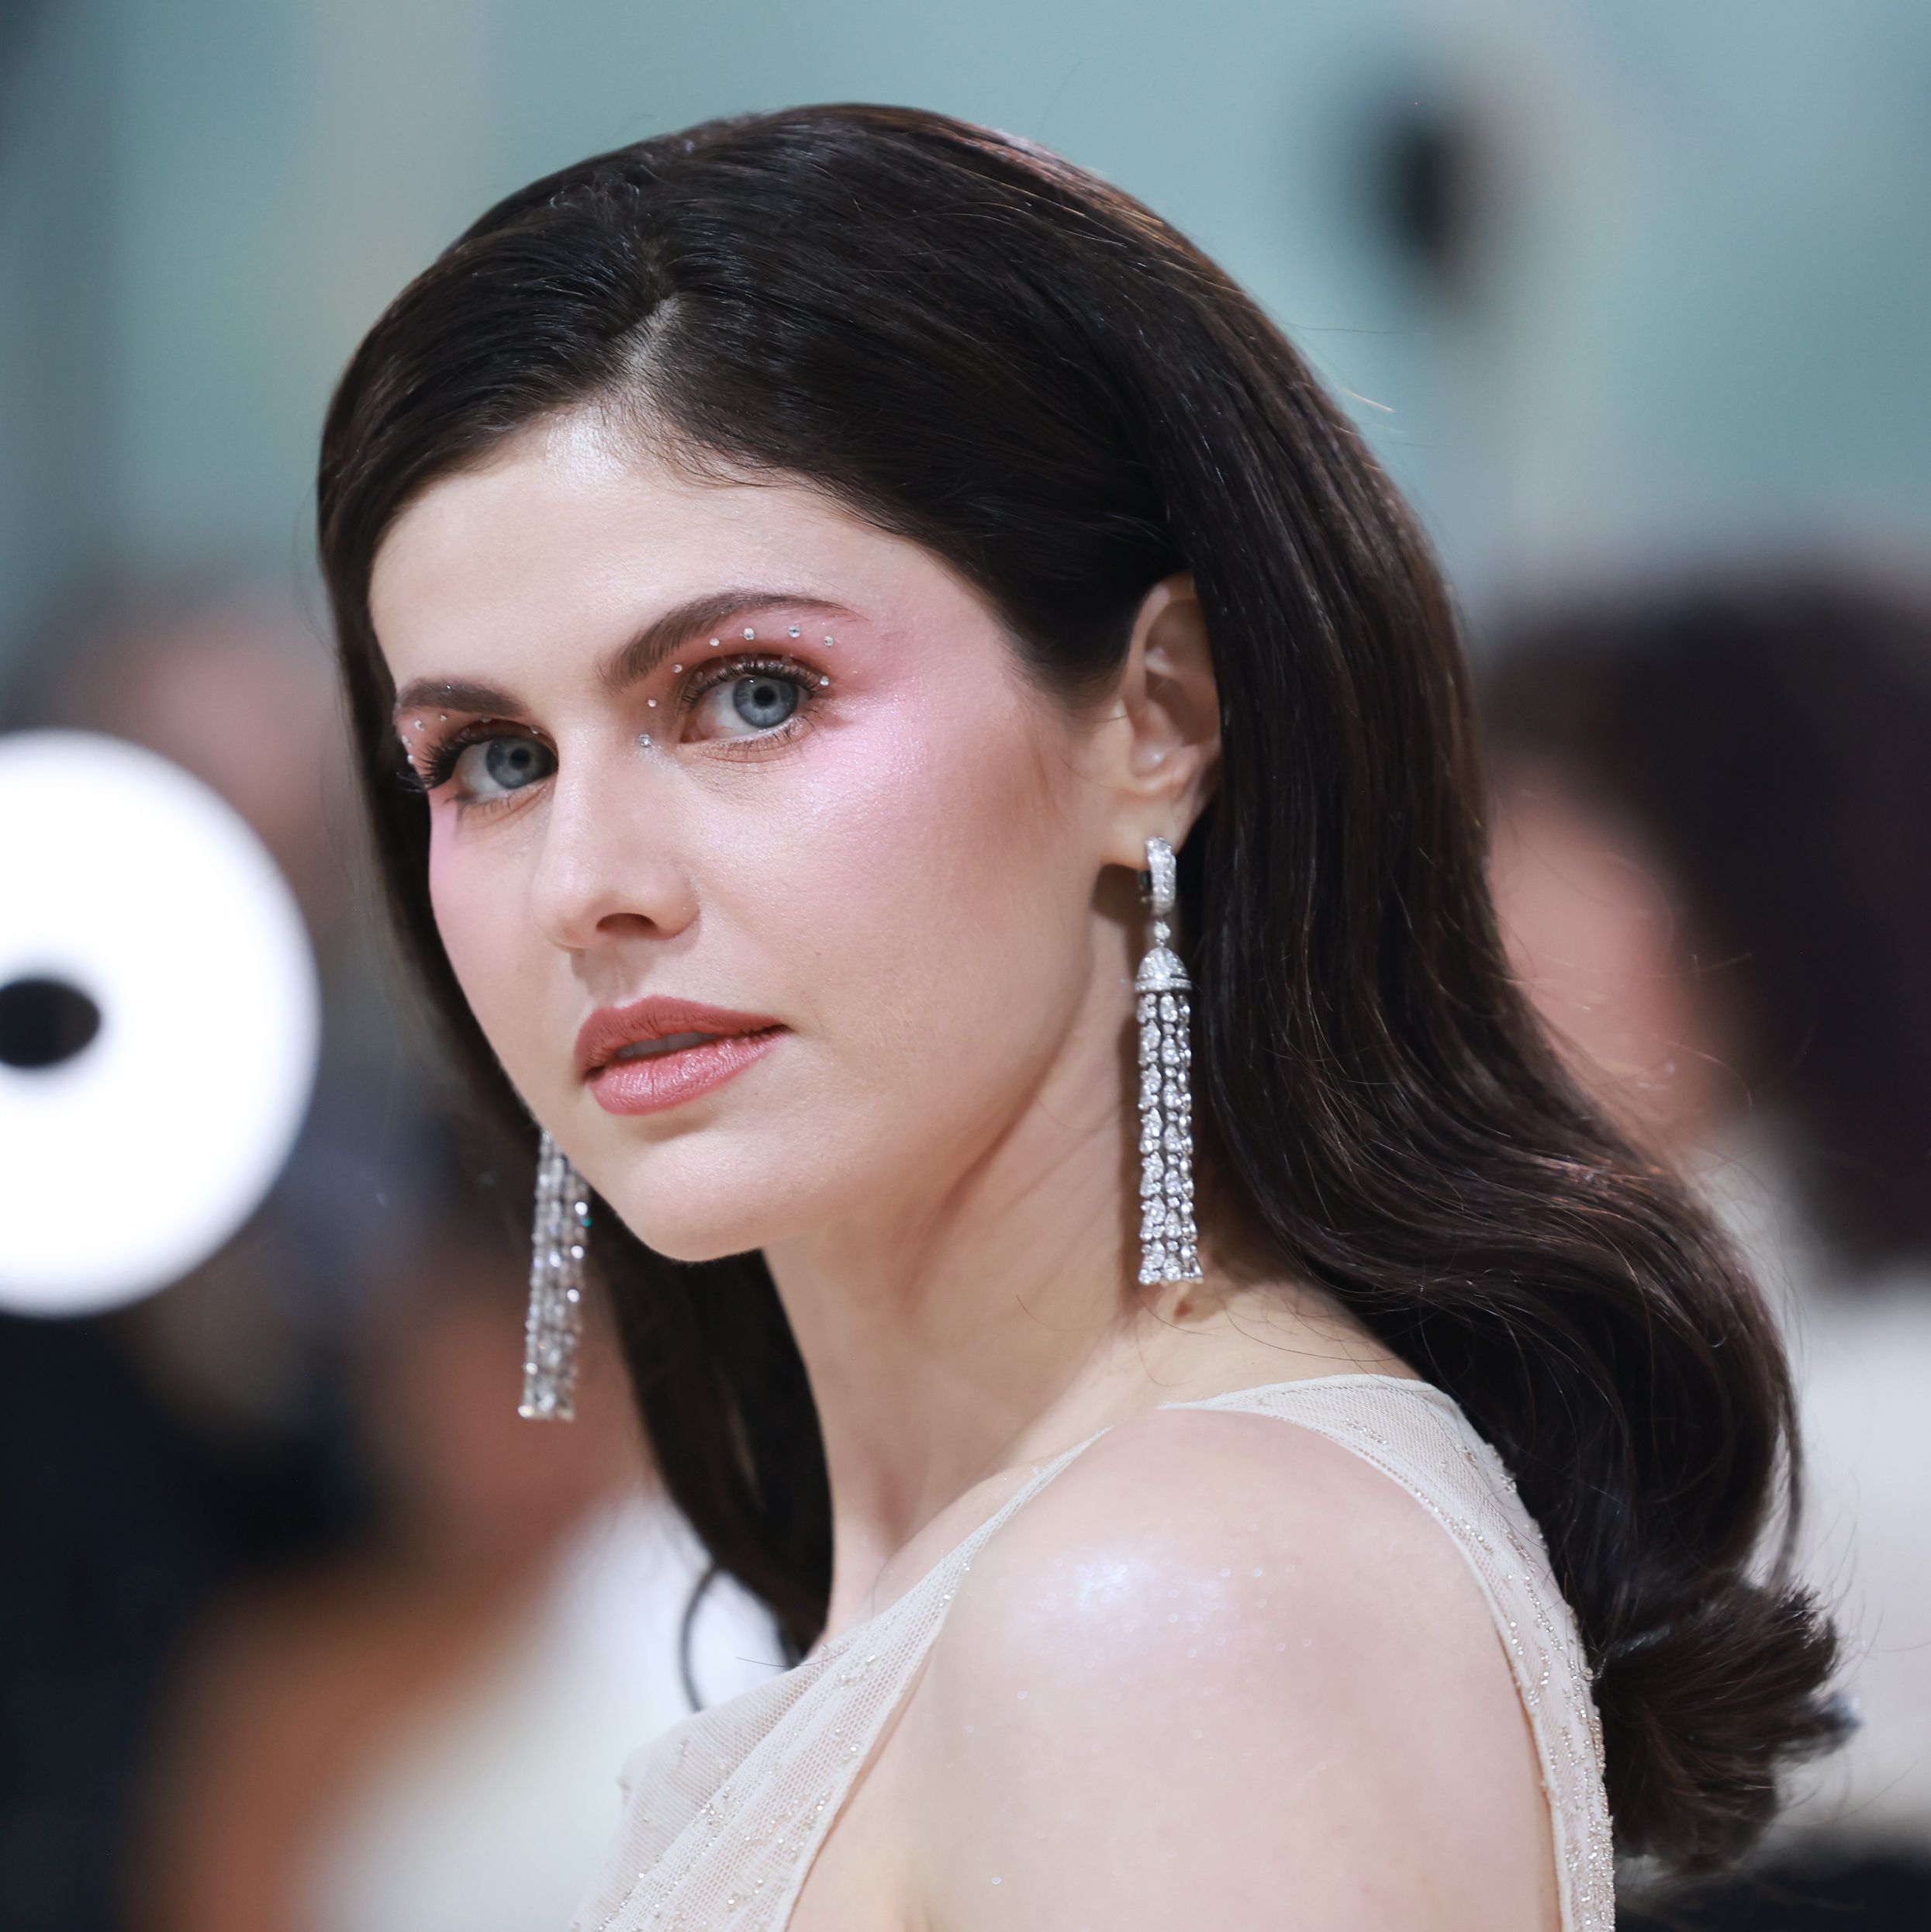 Alexandra Daddario Posed Buck Naked On IG, And Fans Are Went Bonkers